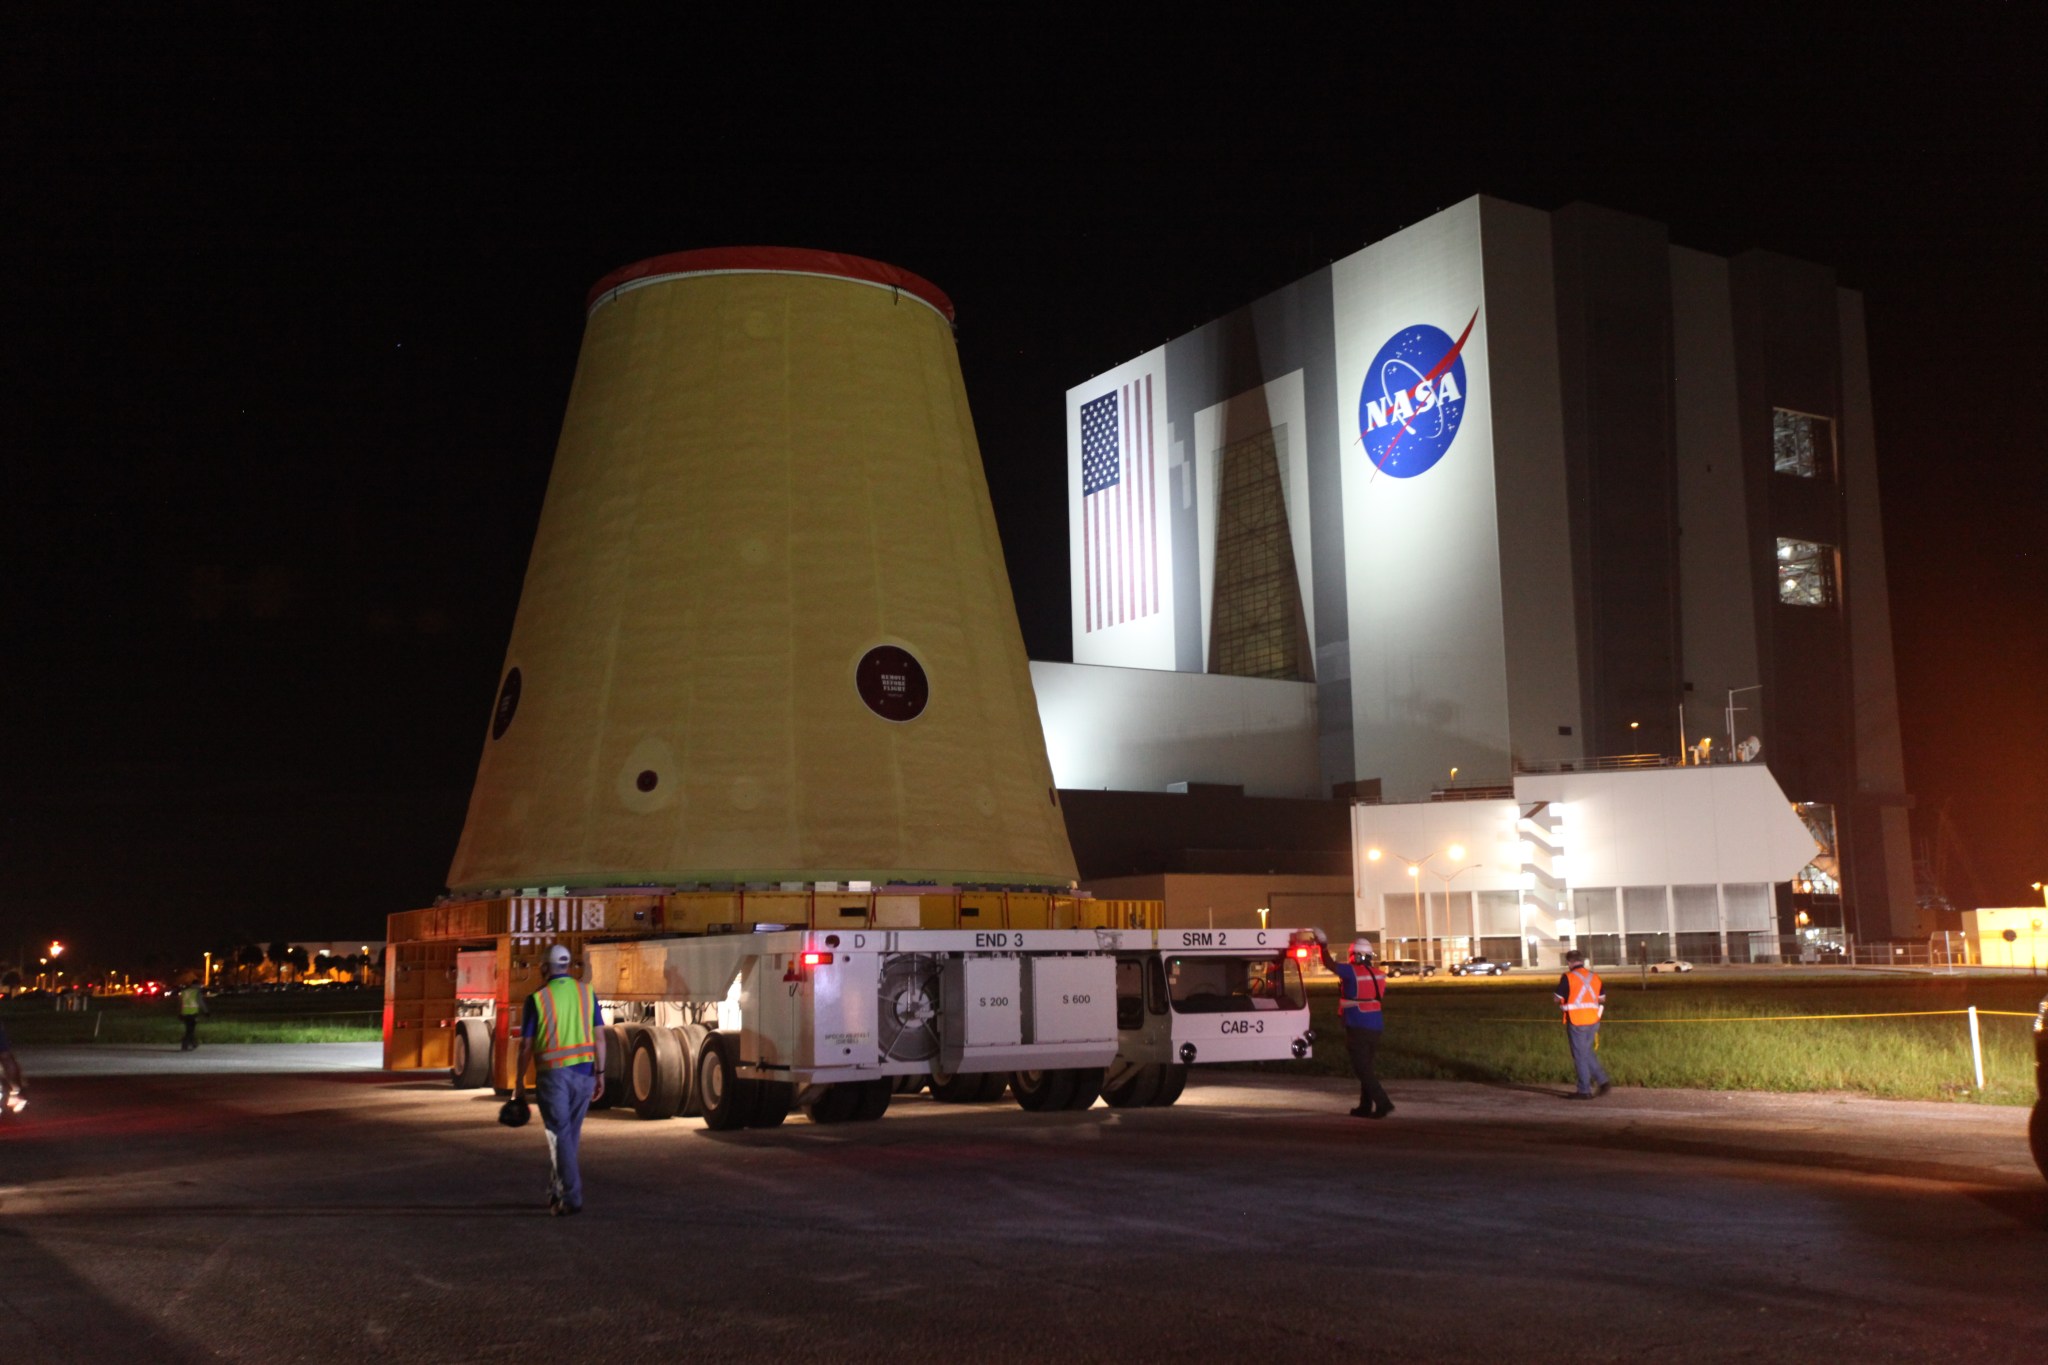 The launch vehicle stage adapter for the Space Launch System rocket moves into the Vehicle Assembly Building on July 30, 2020.